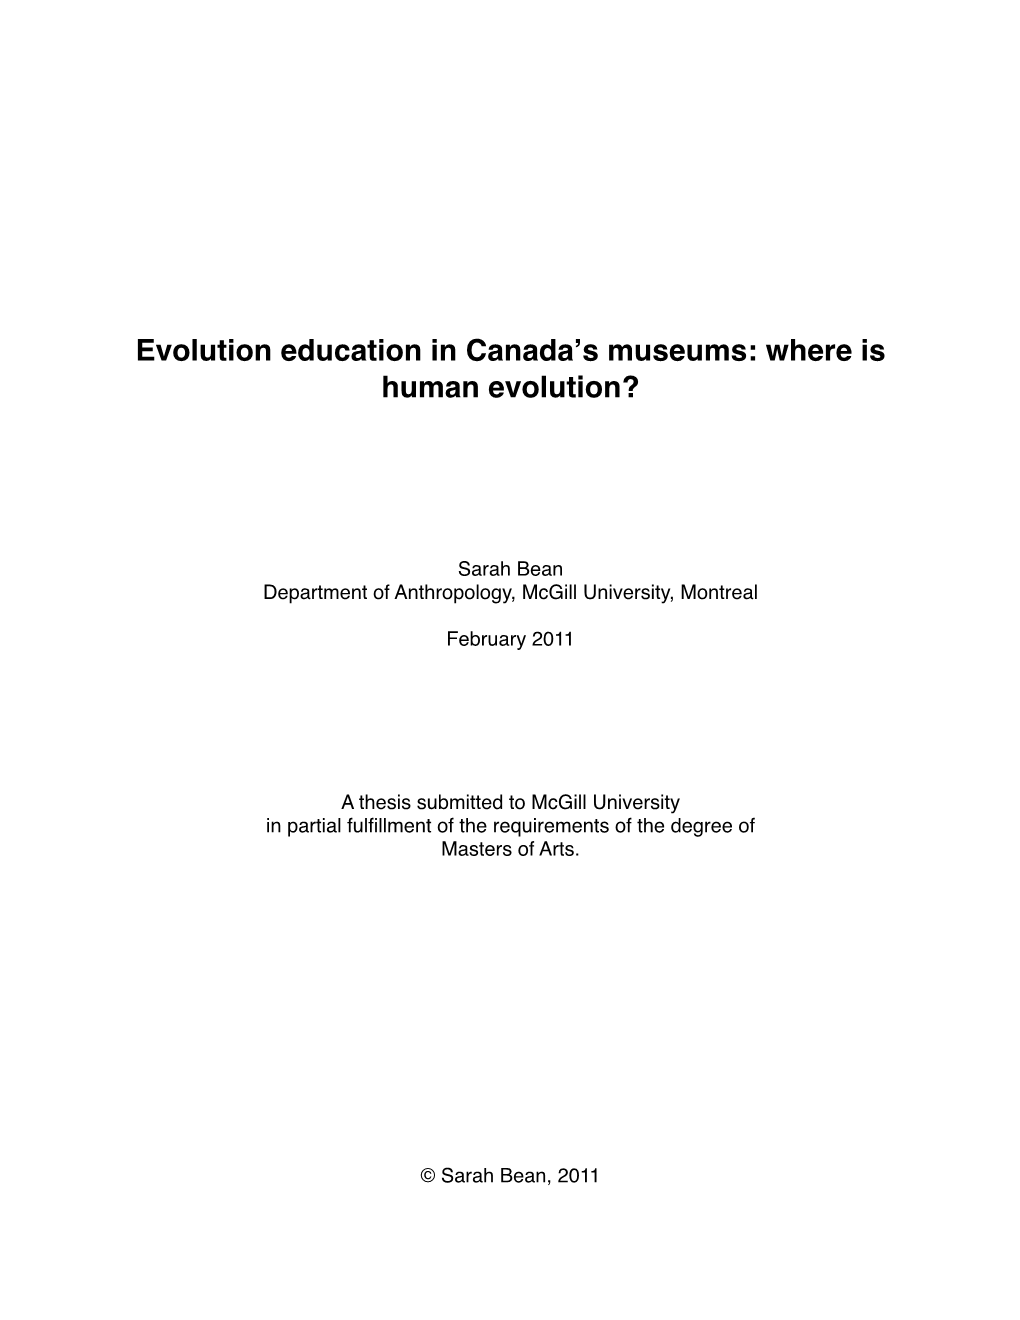 Evolution Education in Canadaʼs Museums: Where Is Human Evolution?